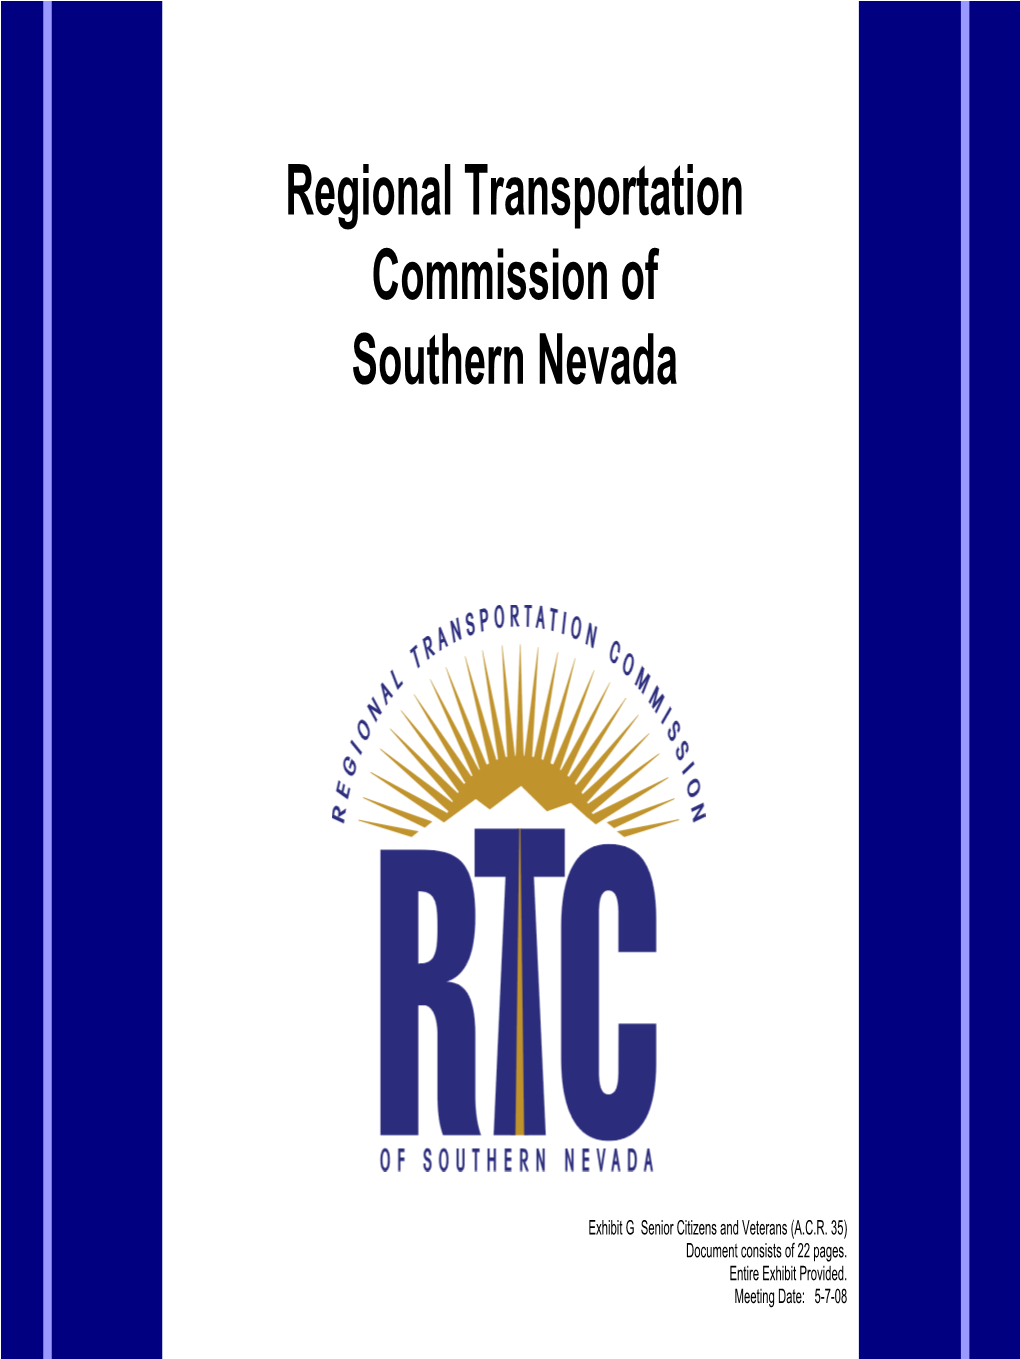 Regional Transportation Commission of Southern Nevada